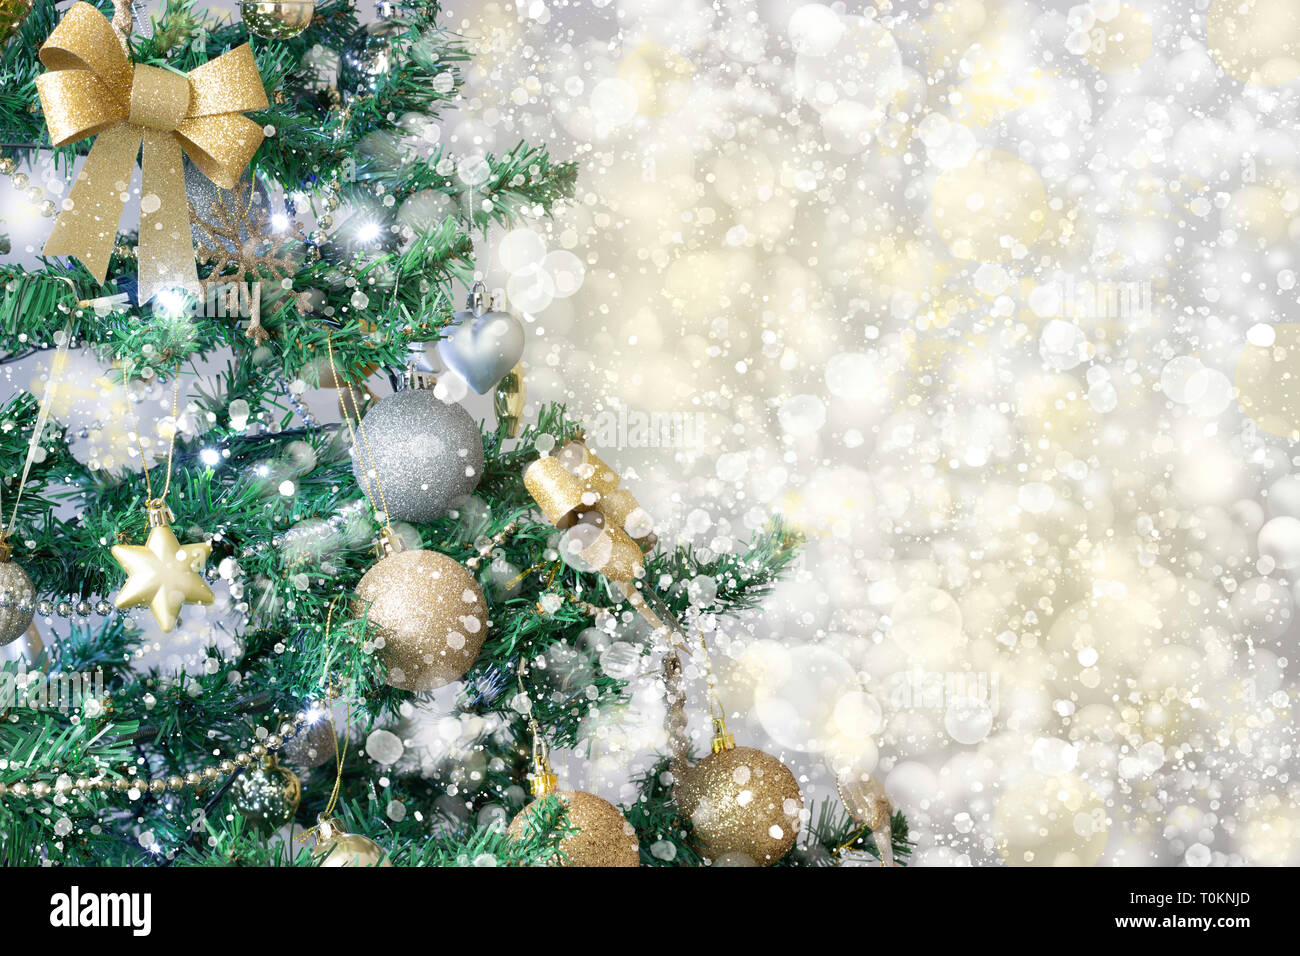 A beautiful Christmas tree festive background with textured snow effect Stock Photo